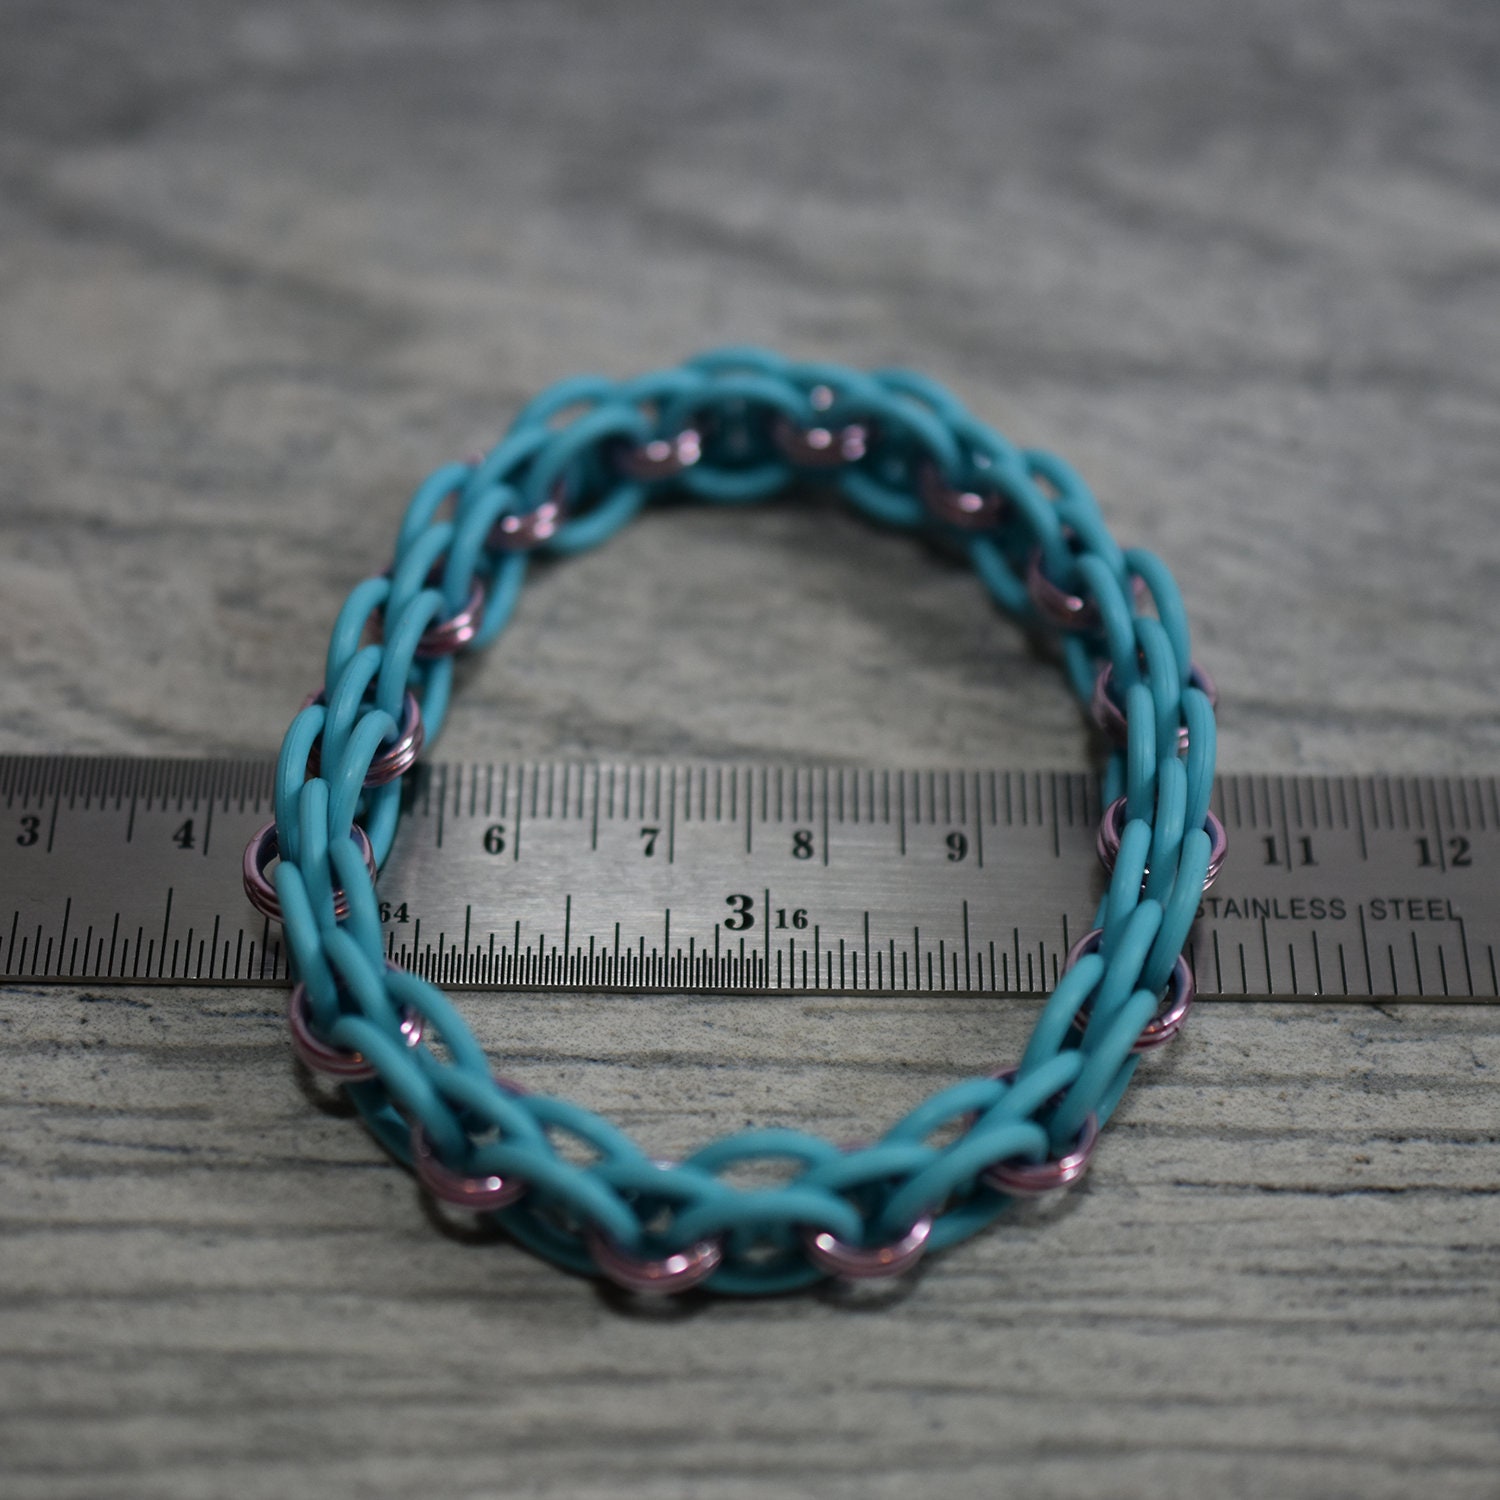 Light Blue and Purple Chainmail Bracelet Helms Weave With Rubber Rings ...